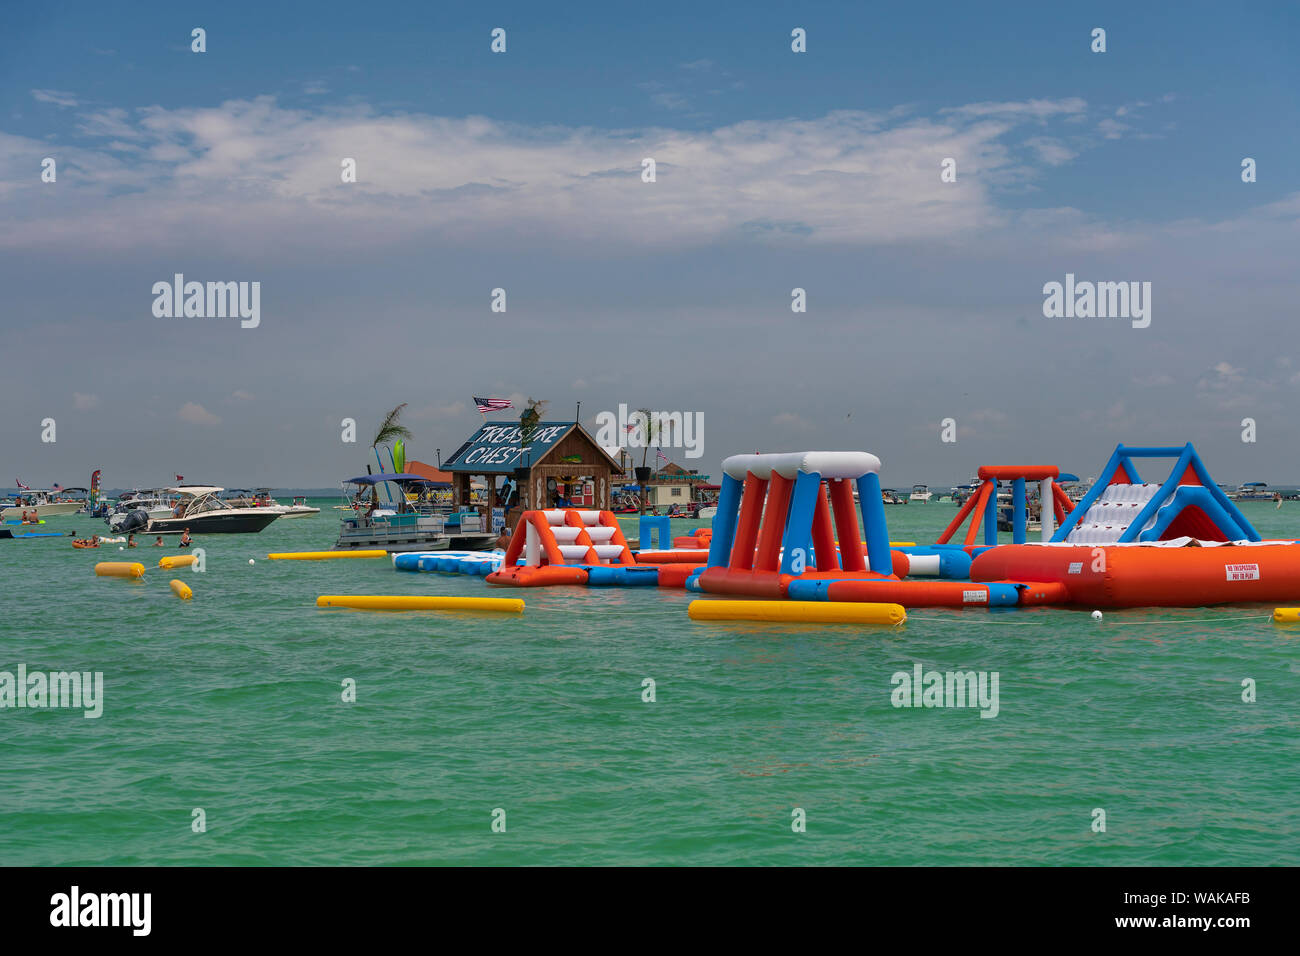 Boats and people in the waters off Fort Walton Beach, Florida, floating kiosk, and blow up playground Stock Photo